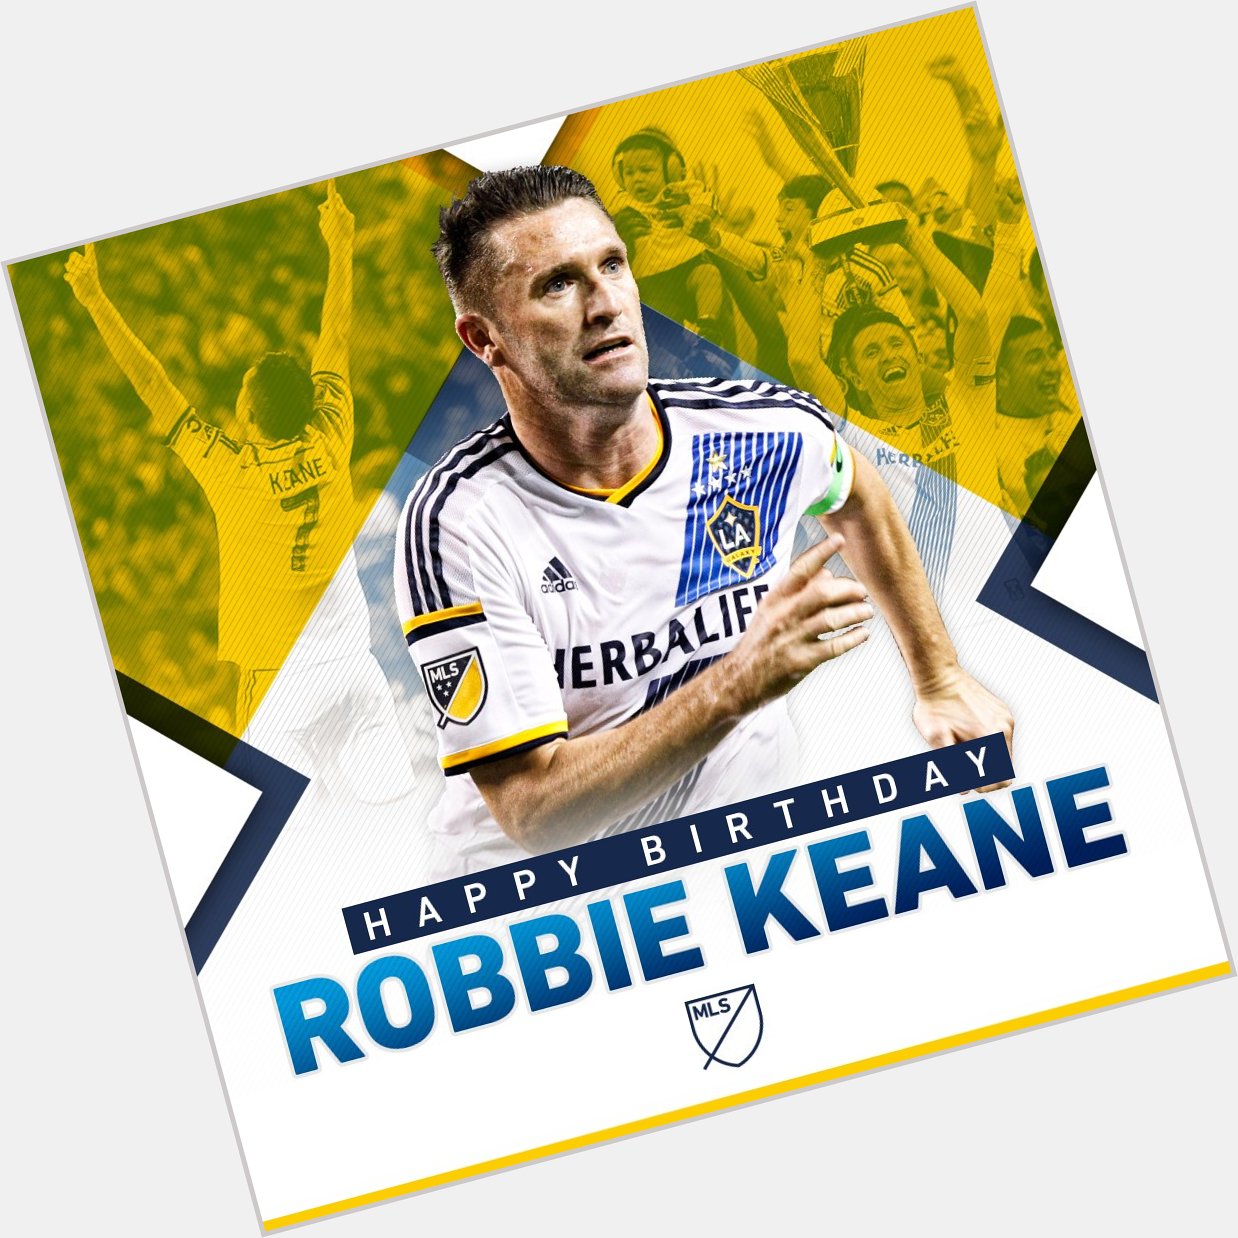 Three cups, one Shield & an MVP to boot.

Happy birthday to an all-time great, Robbie Keane! 